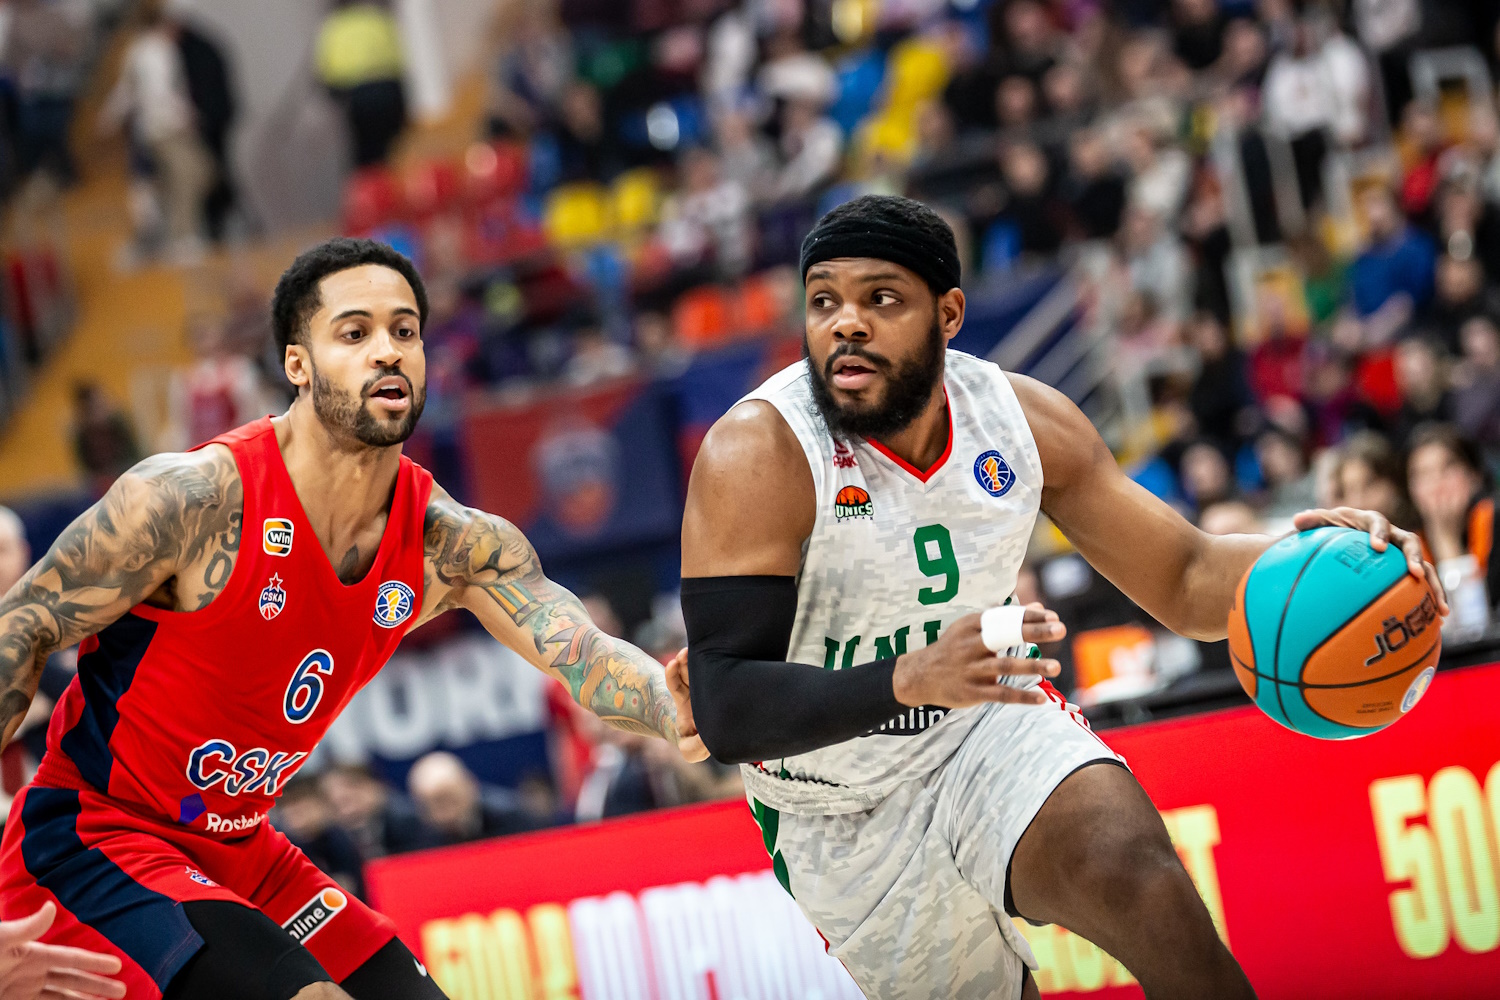 UNICS and CSKA will fight for a win in the regular season, Uralmash against Runa, and Loko will host Enisey. Preview April 13